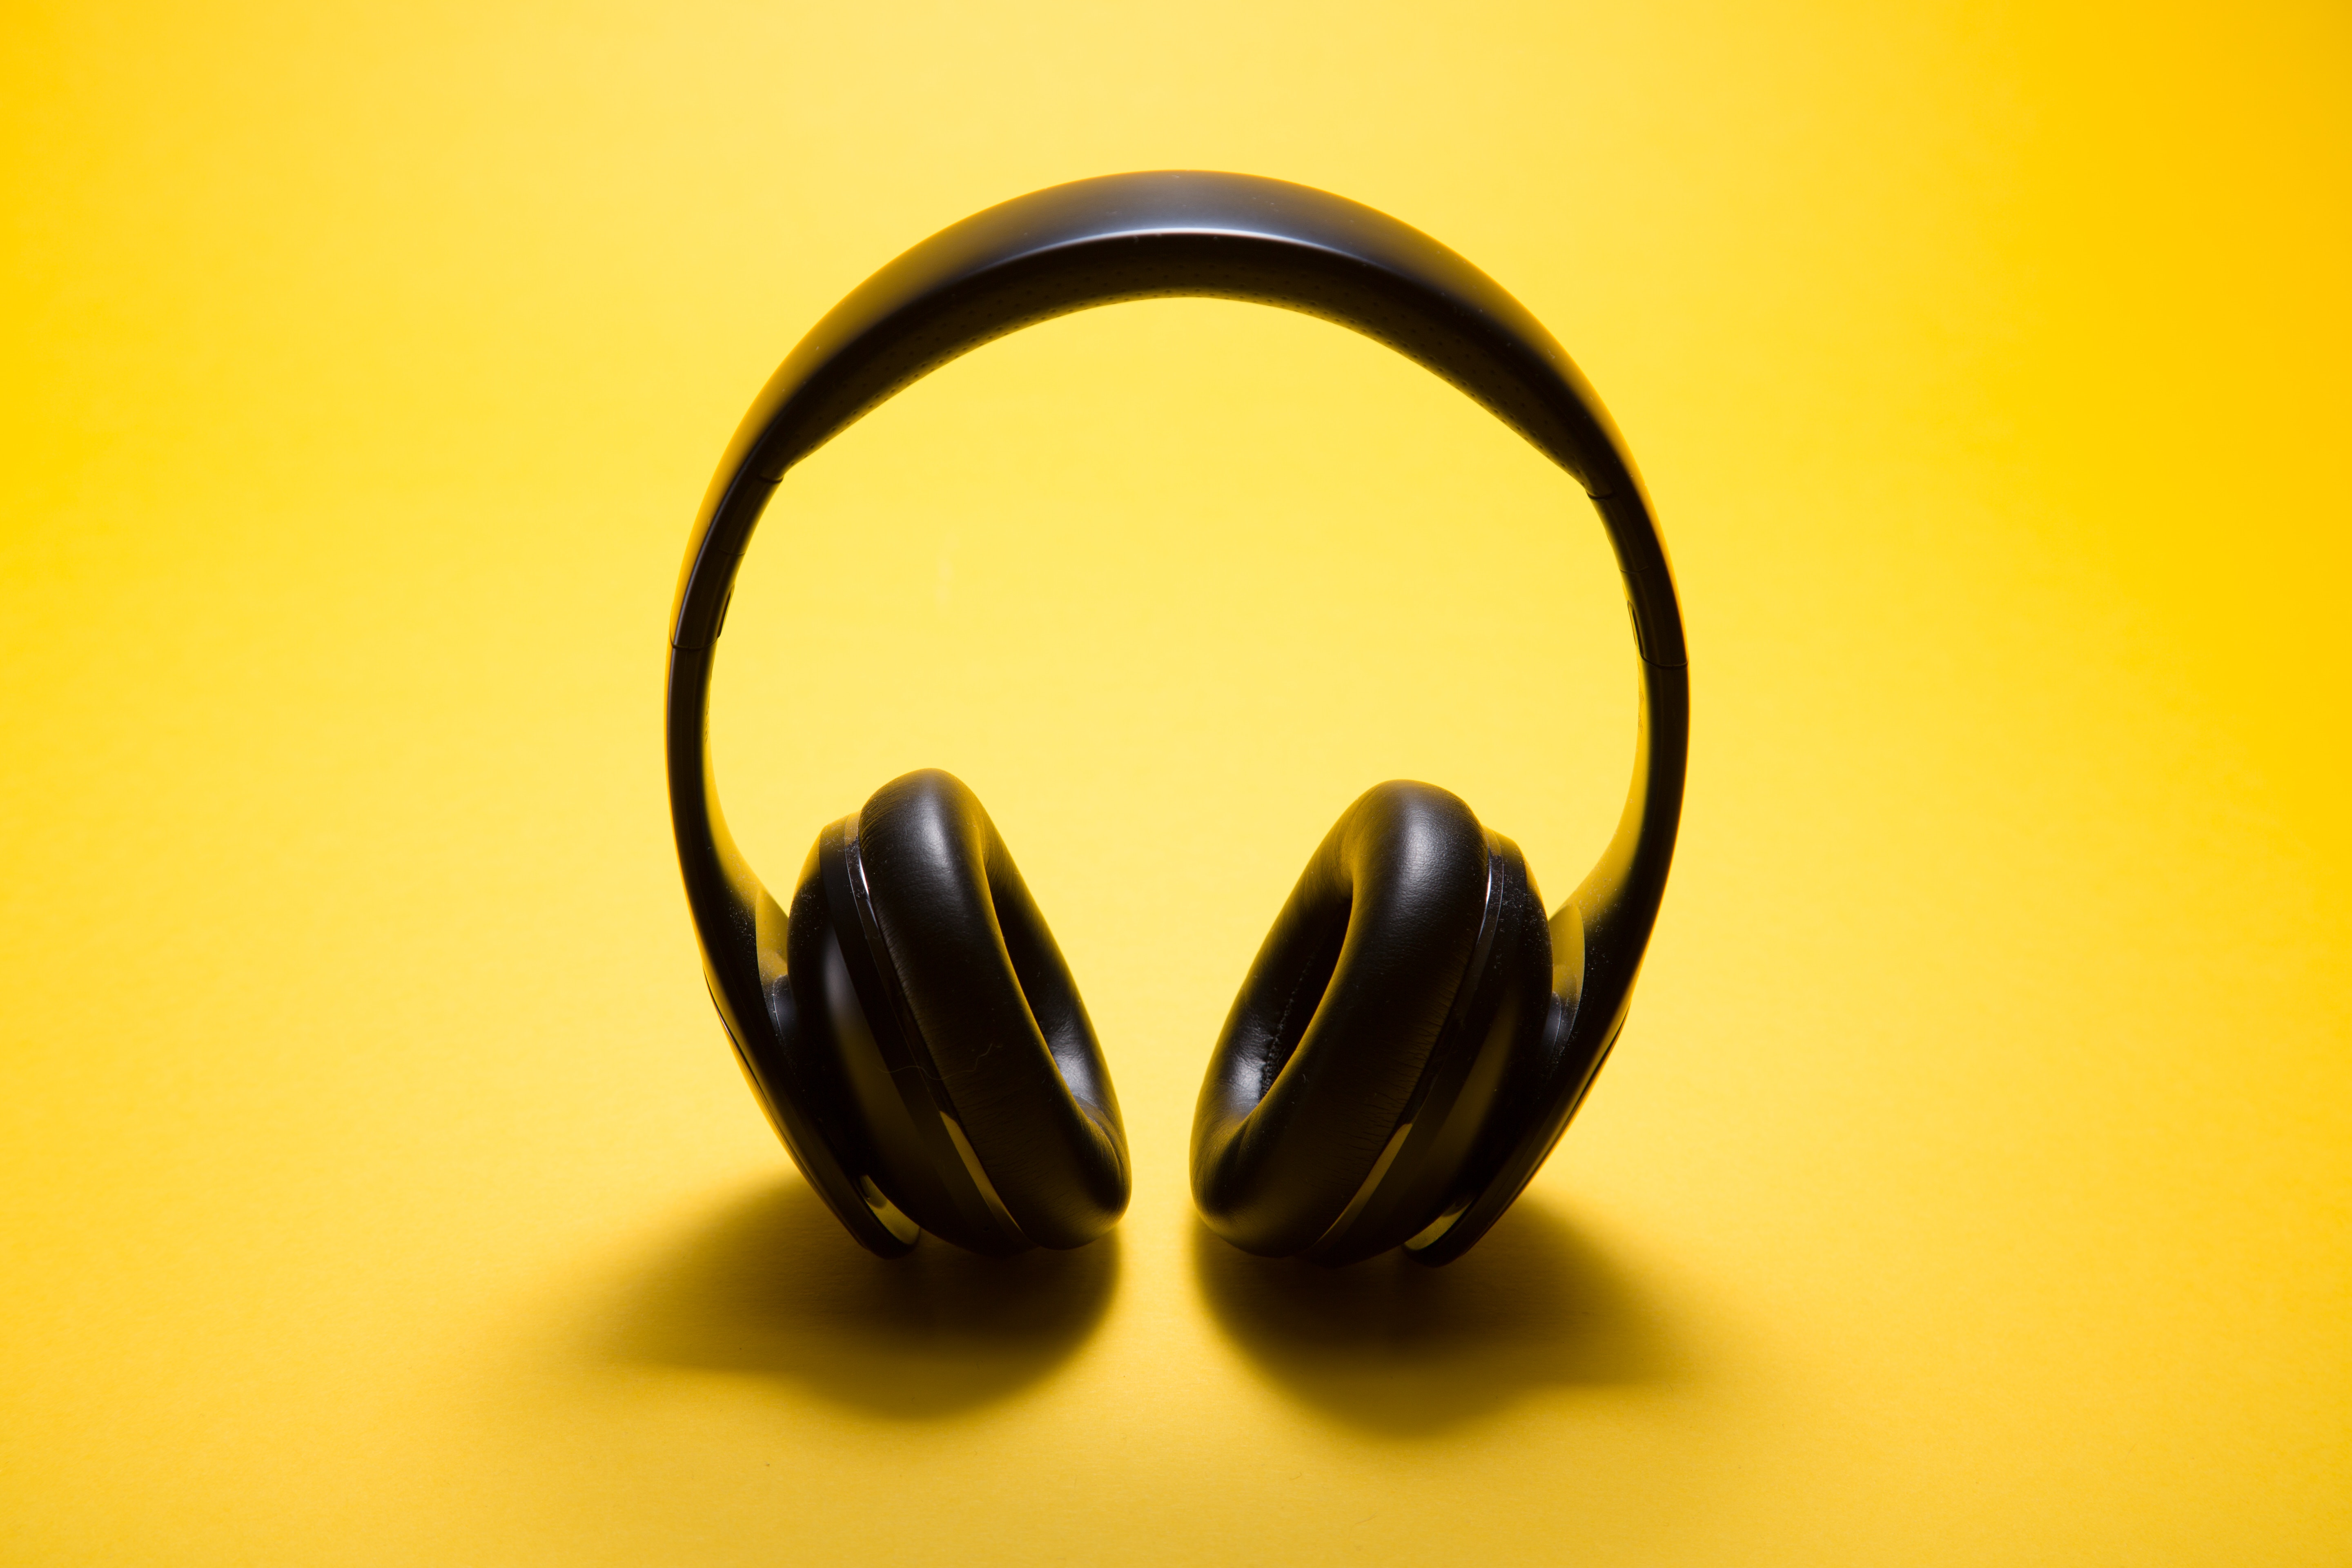 An image of black headphones with a yellow background.